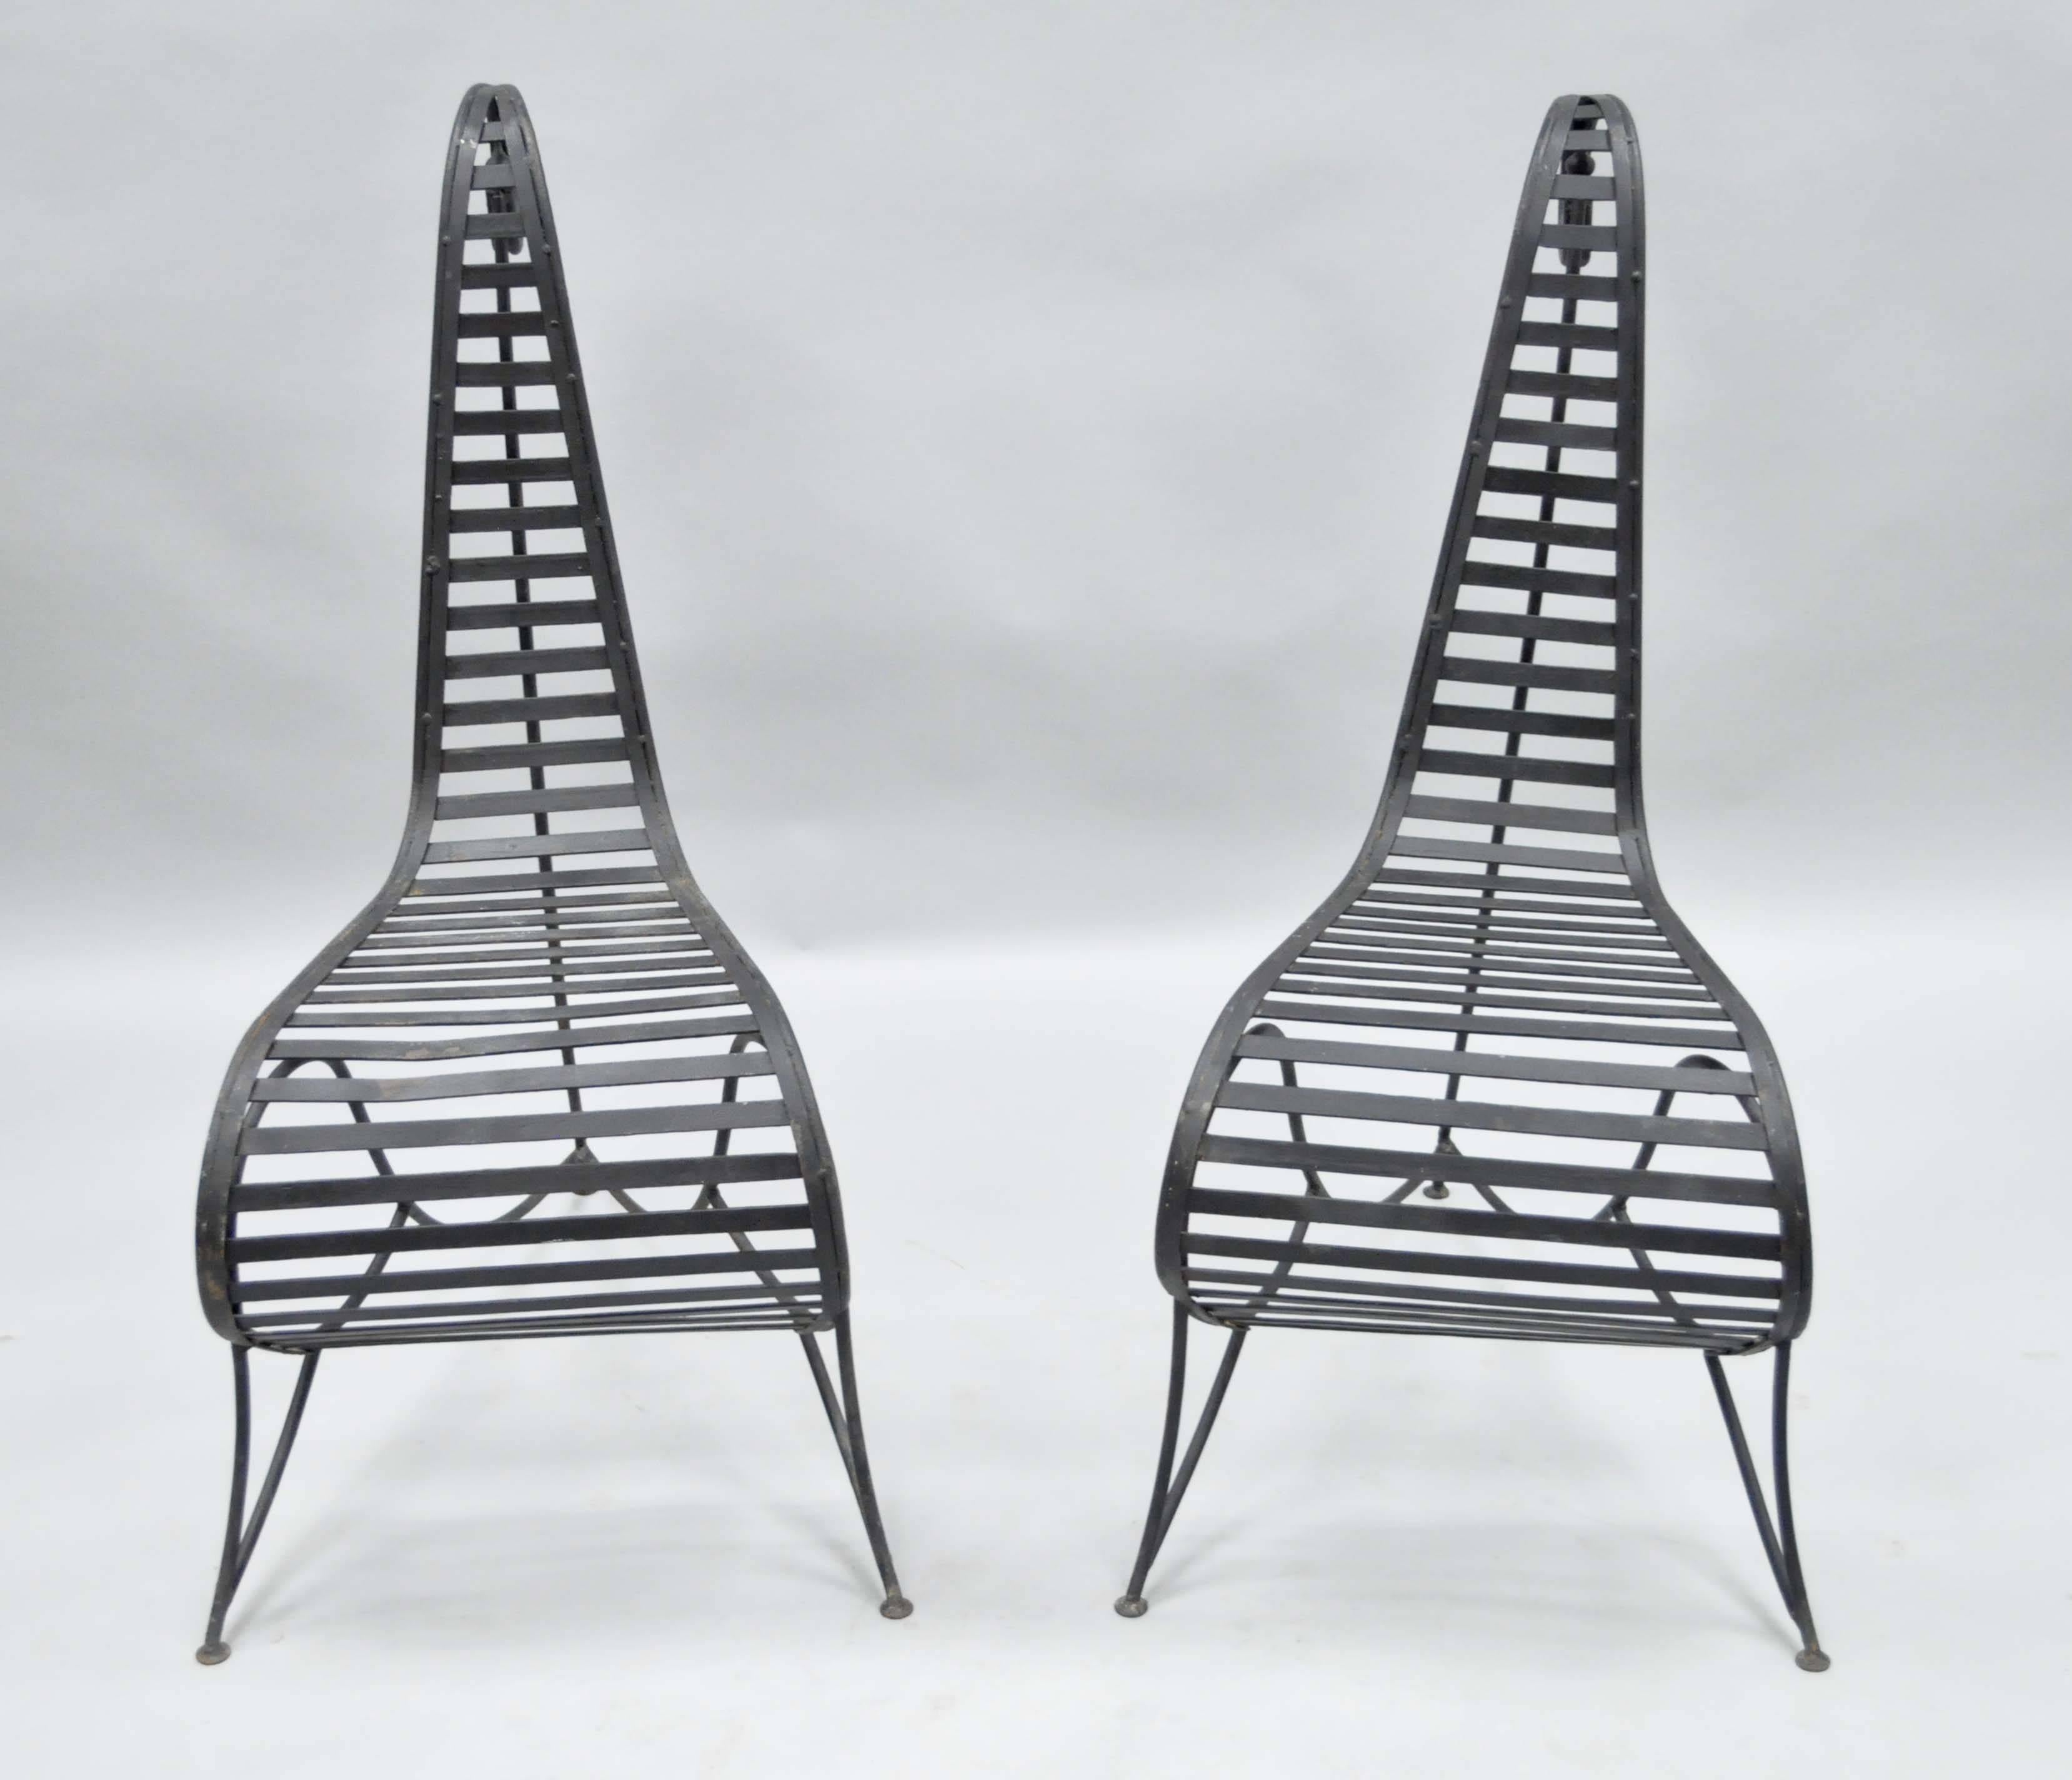 Pair of Vintage Whimsical Steel Iron Spine Lounge Chairs after André Dubreuil 1